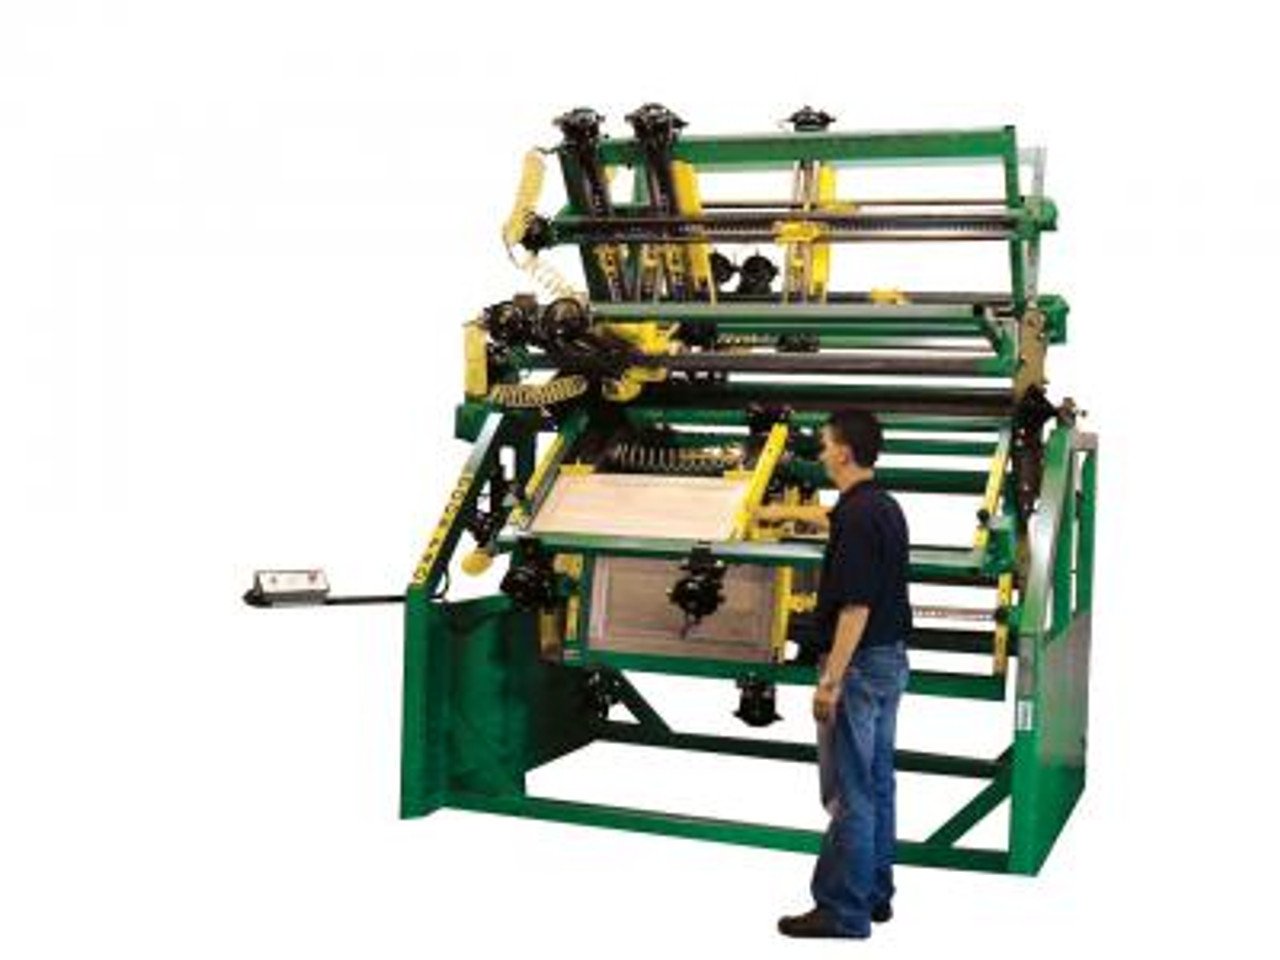 Taylor Manufacturing's 8 Section Pneumatic Door Pro